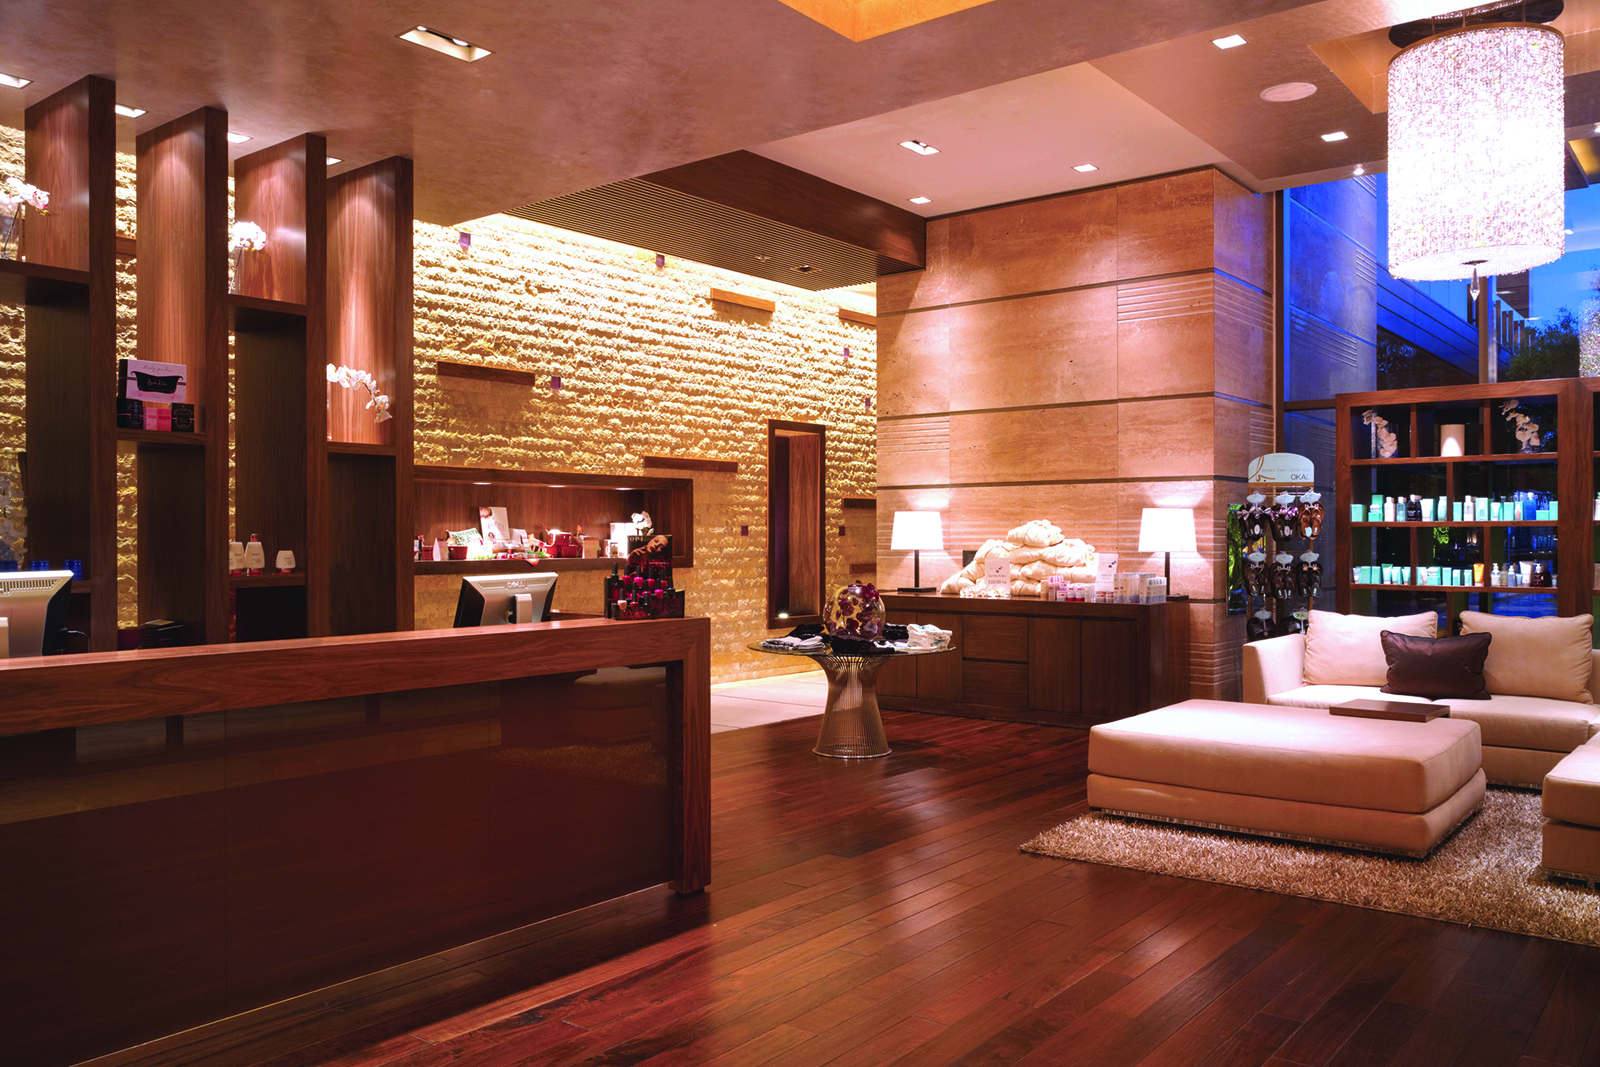 Spa Mio spa, prices, services, hours, and locals discount.  Located in The M Resort Henderson, NV Las Vegas, NV.